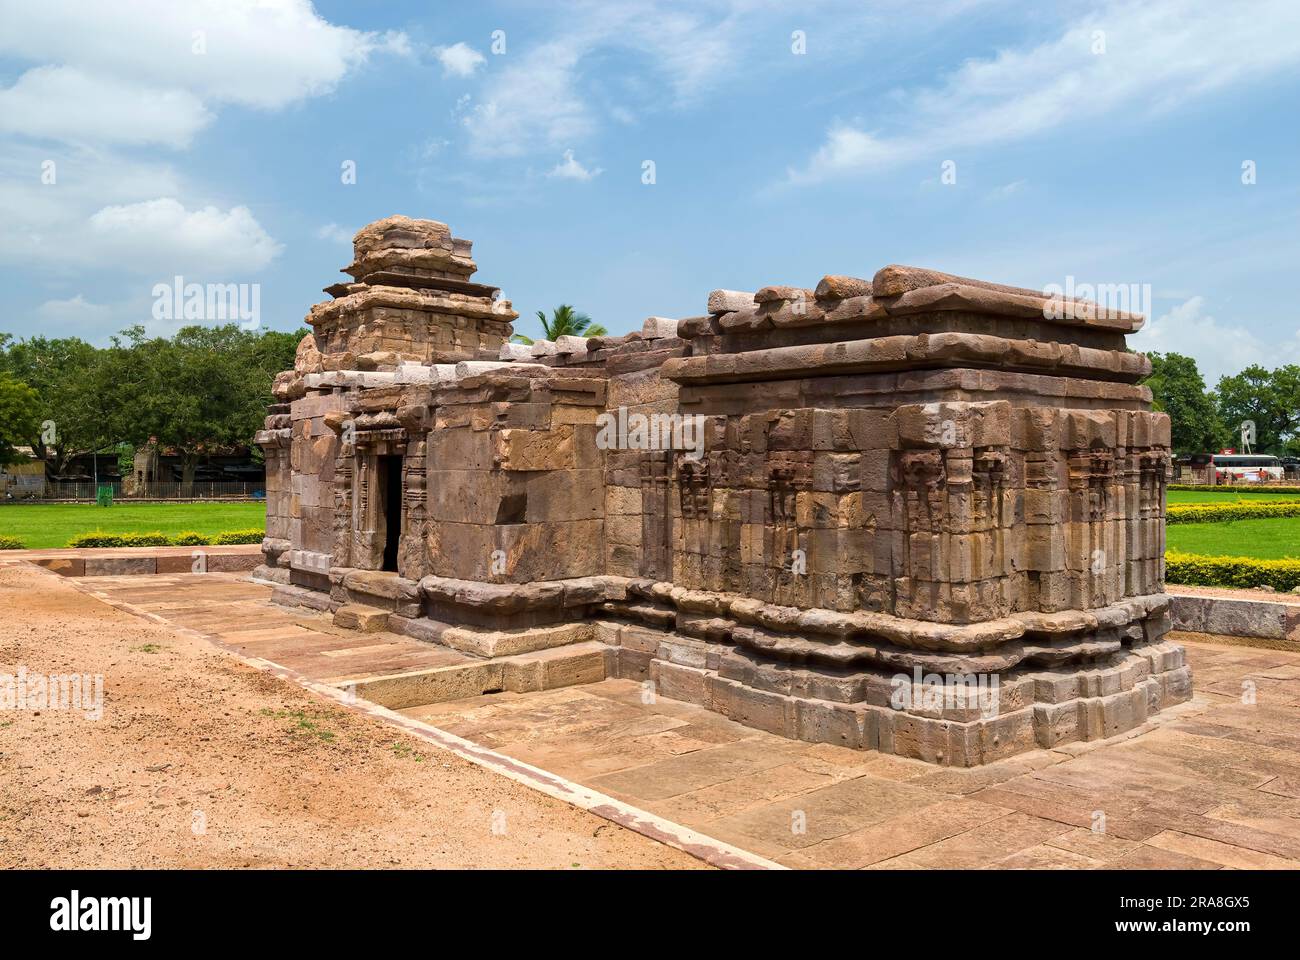 Aihole, about 125 temples divided into 22 groups on the banks of the Malaprabha River, as the cradle of Hindu temple architecture. Most of these Stock Photo